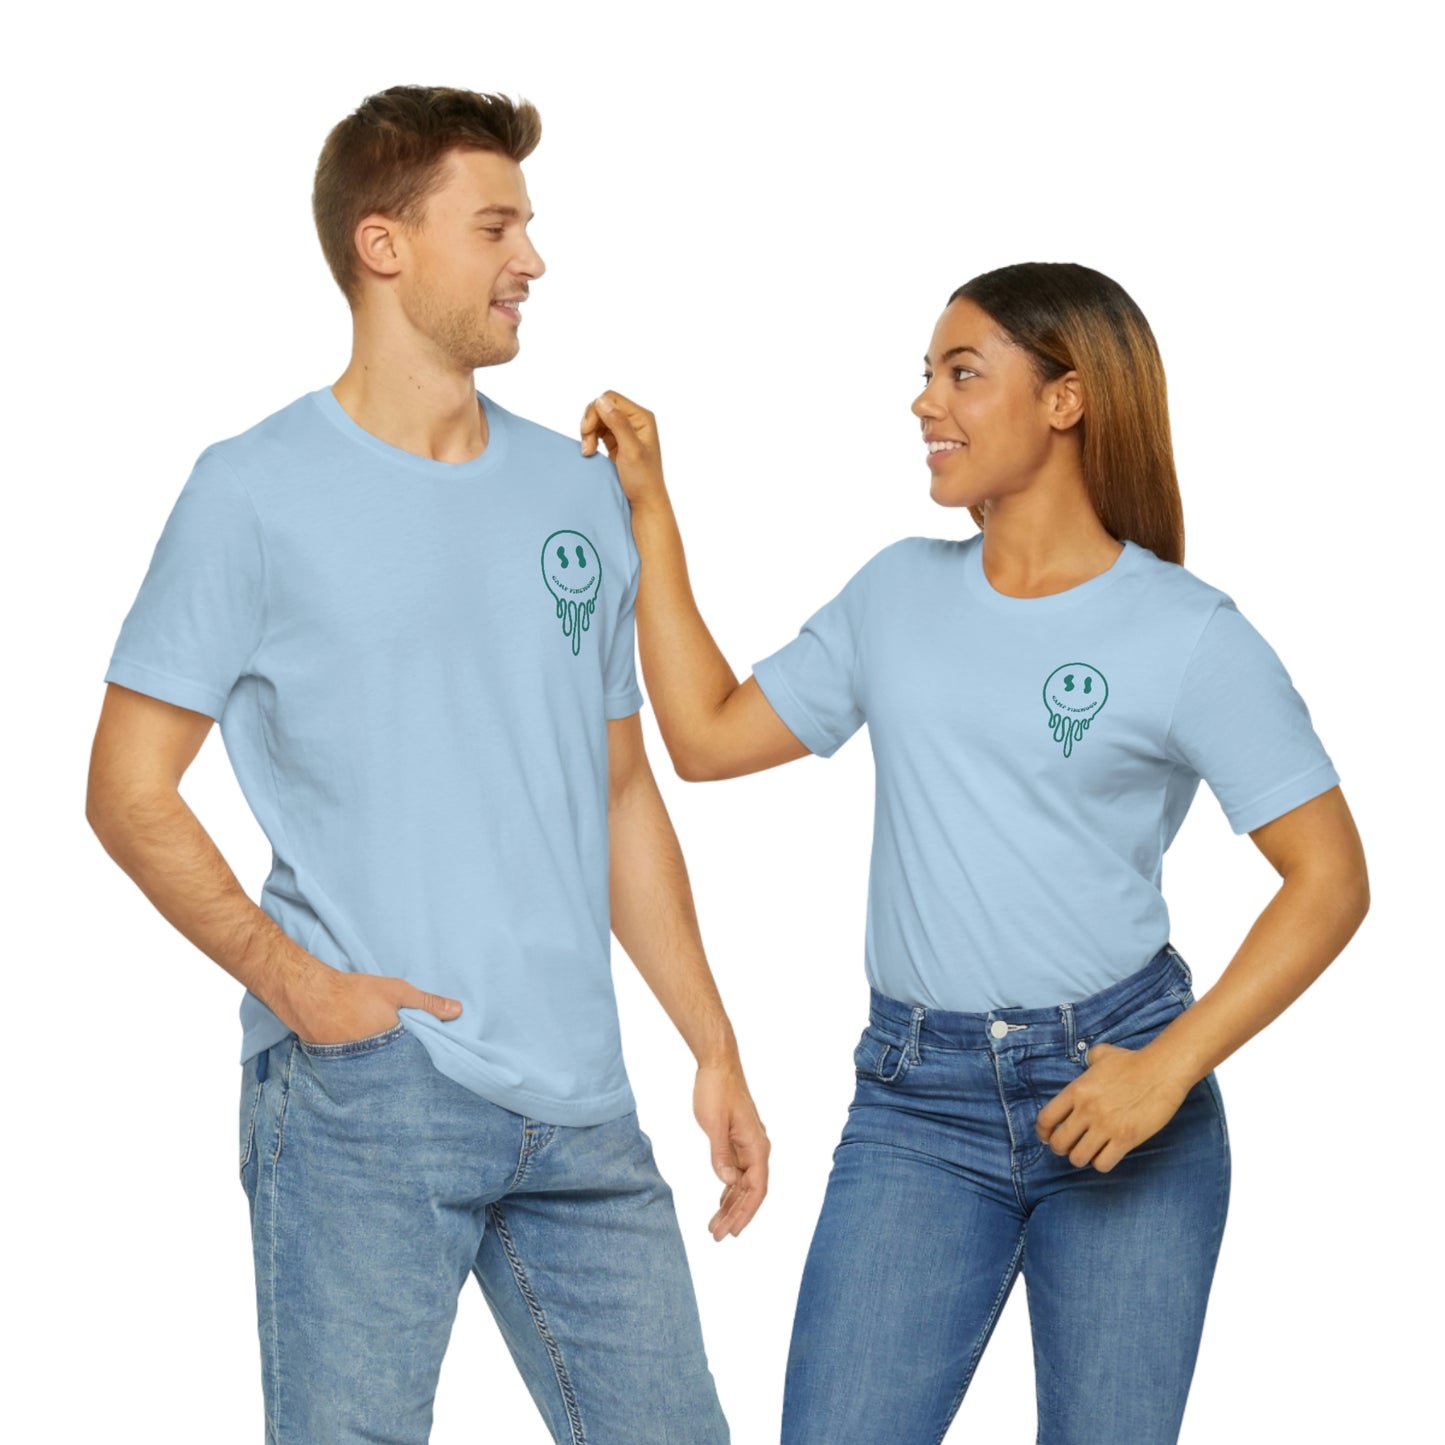 Pinewood Green drip smiley Adult SS Tee (multiple colors)